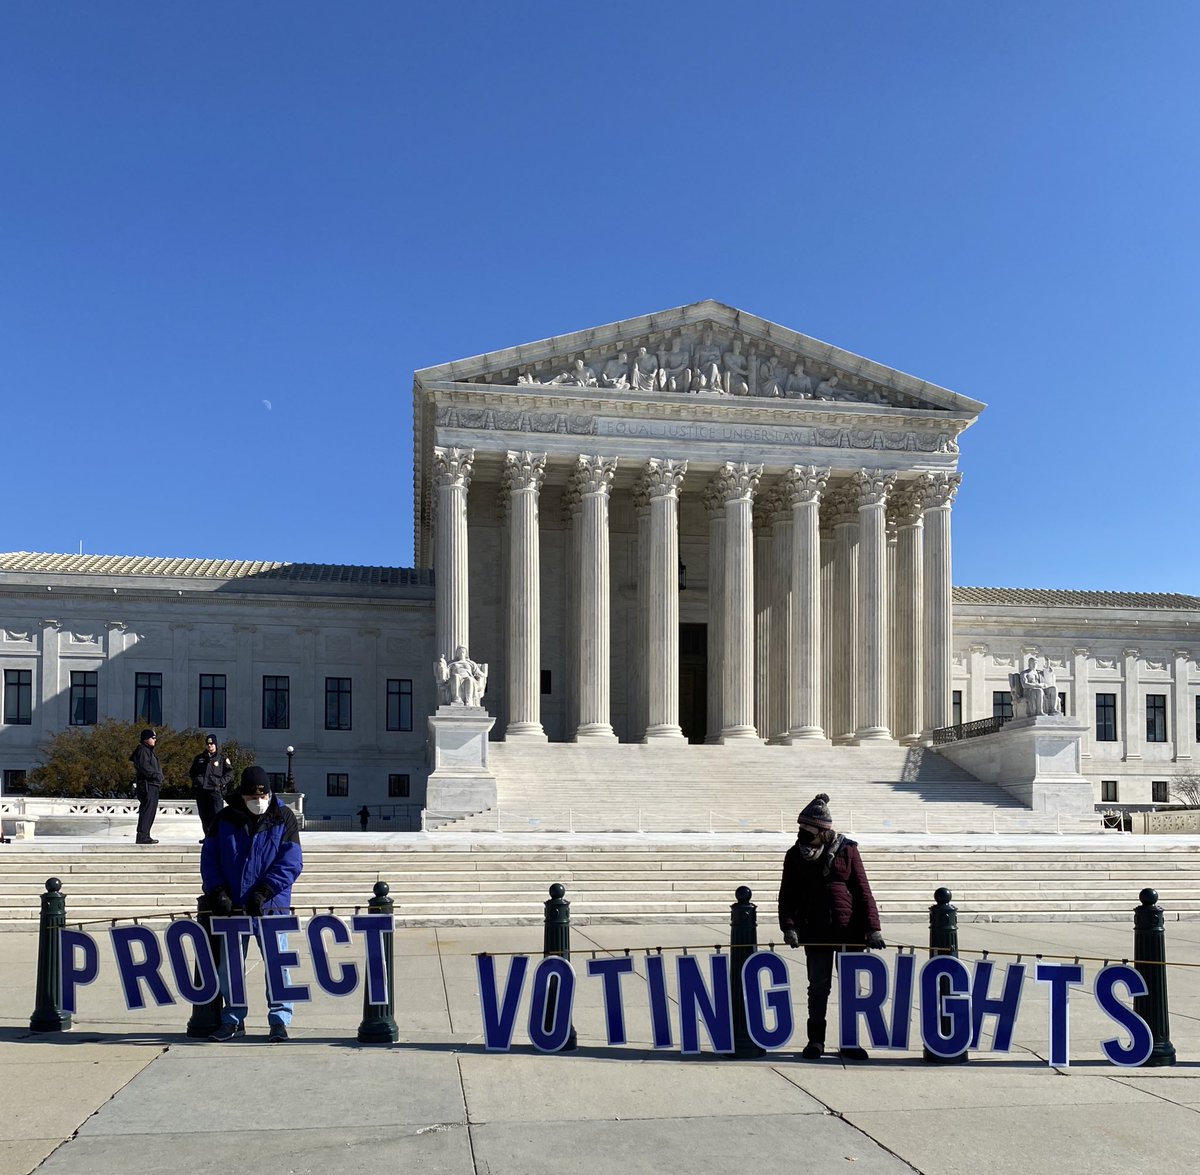 SCOTUS is no longer upholding the Constitutional right to vote. 
We need #VotingRightsForThePeople